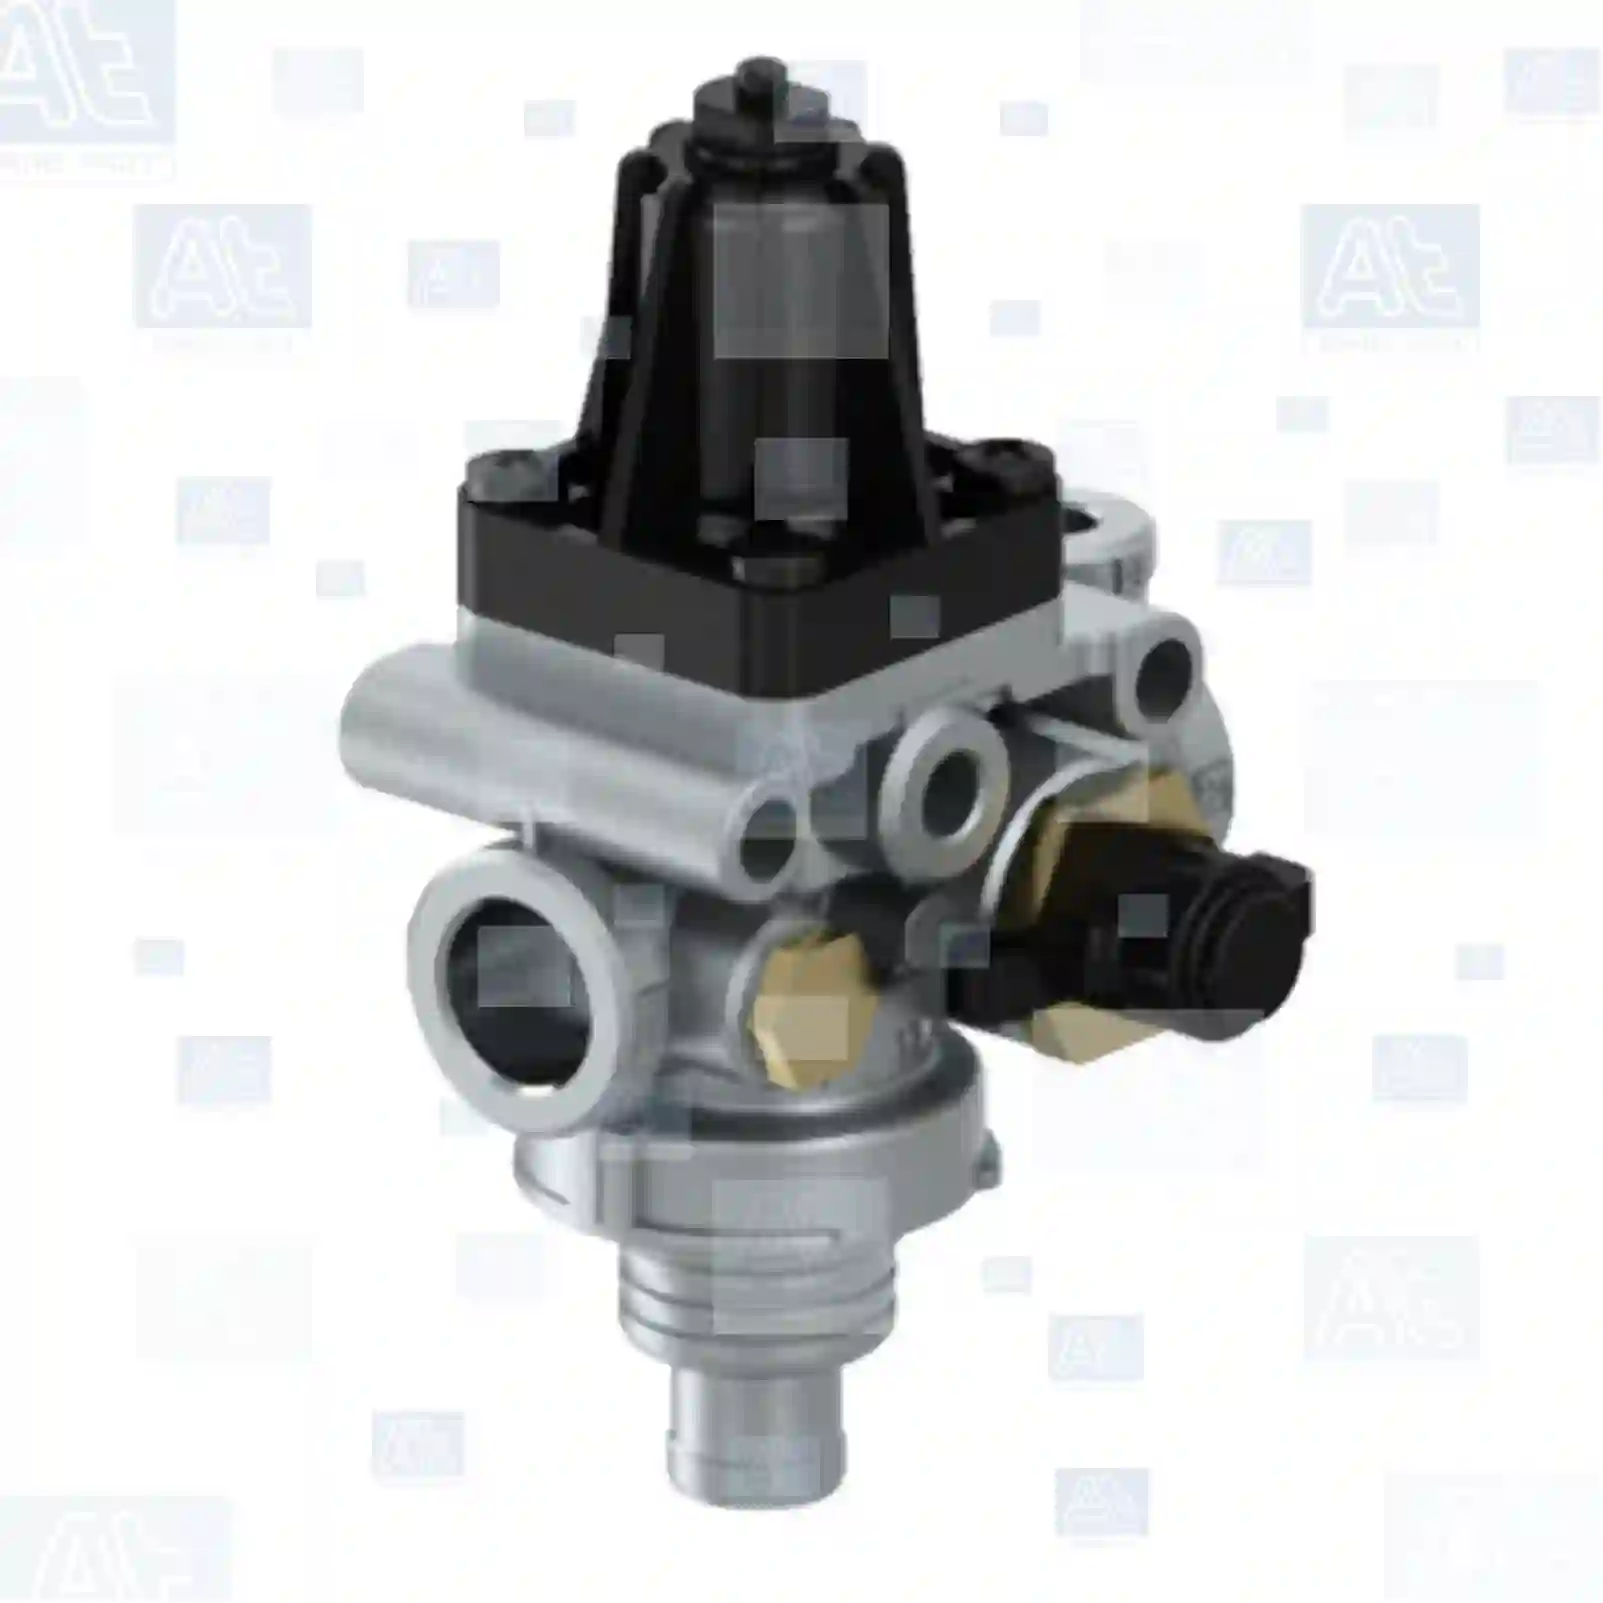 Pressure regulator, 77713975, 0661689, 1506504, 1518279, 1518284, 661689, 661689A, 661689R, BBU5210, 02516923, 02516973, 02521211, 02808514, 04804765, 04805762, 42085762, 42470088, 500005822, 5000873228, 02516892, 02516923, 02516973, 02521211, 02808514, 04804765, 42085762, 42470088, 4804765, 500005822, 81521016076, 81521016081, 81521016083, 81521016085, 81521016103, 81521016112, 81521016114, 81521016119, 81521016123, 81521016132, 81521016155, 81521016177, 81521016199, 81521016207, 81521016252, 81521016304, 81521019076, 81521019083, 81521019085, 81521019123, 81521019132, 82521016035, 85500011569, 85500011617, 85500011813, 85500013210, 0014310606, 0014311206, 0014313406, 0014319806, 0024311306, 0024313406, 0024314306, 0024314906, 0024318306, 0024319606, 0034313706, 5000243947, 5000464197, 5000464947, 5000819345, 5000819893, 5021170476, 5021170477, 7700051785, 1935690, 6789355, ZG50578-0008 ||  77713975 At Spare Part | Engine, Accelerator Pedal, Camshaft, Connecting Rod, Crankcase, Crankshaft, Cylinder Head, Engine Suspension Mountings, Exhaust Manifold, Exhaust Gas Recirculation, Filter Kits, Flywheel Housing, General Overhaul Kits, Engine, Intake Manifold, Oil Cleaner, Oil Cooler, Oil Filter, Oil Pump, Oil Sump, Piston & Liner, Sensor & Switch, Timing Case, Turbocharger, Cooling System, Belt Tensioner, Coolant Filter, Coolant Pipe, Corrosion Prevention Agent, Drive, Expansion Tank, Fan, Intercooler, Monitors & Gauges, Radiator, Thermostat, V-Belt / Timing belt, Water Pump, Fuel System, Electronical Injector Unit, Feed Pump, Fuel Filter, cpl., Fuel Gauge Sender,  Fuel Line, Fuel Pump, Fuel Tank, Injection Line Kit, Injection Pump, Exhaust System, Clutch & Pedal, Gearbox, Propeller Shaft, Axles, Brake System, Hubs & Wheels, Suspension, Leaf Spring, Universal Parts / Accessories, Steering, Electrical System, Cabin Pressure regulator, 77713975, 0661689, 1506504, 1518279, 1518284, 661689, 661689A, 661689R, BBU5210, 02516923, 02516973, 02521211, 02808514, 04804765, 04805762, 42085762, 42470088, 500005822, 5000873228, 02516892, 02516923, 02516973, 02521211, 02808514, 04804765, 42085762, 42470088, 4804765, 500005822, 81521016076, 81521016081, 81521016083, 81521016085, 81521016103, 81521016112, 81521016114, 81521016119, 81521016123, 81521016132, 81521016155, 81521016177, 81521016199, 81521016207, 81521016252, 81521016304, 81521019076, 81521019083, 81521019085, 81521019123, 81521019132, 82521016035, 85500011569, 85500011617, 85500011813, 85500013210, 0014310606, 0014311206, 0014313406, 0014319806, 0024311306, 0024313406, 0024314306, 0024314906, 0024318306, 0024319606, 0034313706, 5000243947, 5000464197, 5000464947, 5000819345, 5000819893, 5021170476, 5021170477, 7700051785, 1935690, 6789355, ZG50578-0008 ||  77713975 At Spare Part | Engine, Accelerator Pedal, Camshaft, Connecting Rod, Crankcase, Crankshaft, Cylinder Head, Engine Suspension Mountings, Exhaust Manifold, Exhaust Gas Recirculation, Filter Kits, Flywheel Housing, General Overhaul Kits, Engine, Intake Manifold, Oil Cleaner, Oil Cooler, Oil Filter, Oil Pump, Oil Sump, Piston & Liner, Sensor & Switch, Timing Case, Turbocharger, Cooling System, Belt Tensioner, Coolant Filter, Coolant Pipe, Corrosion Prevention Agent, Drive, Expansion Tank, Fan, Intercooler, Monitors & Gauges, Radiator, Thermostat, V-Belt / Timing belt, Water Pump, Fuel System, Electronical Injector Unit, Feed Pump, Fuel Filter, cpl., Fuel Gauge Sender,  Fuel Line, Fuel Pump, Fuel Tank, Injection Line Kit, Injection Pump, Exhaust System, Clutch & Pedal, Gearbox, Propeller Shaft, Axles, Brake System, Hubs & Wheels, Suspension, Leaf Spring, Universal Parts / Accessories, Steering, Electrical System, Cabin